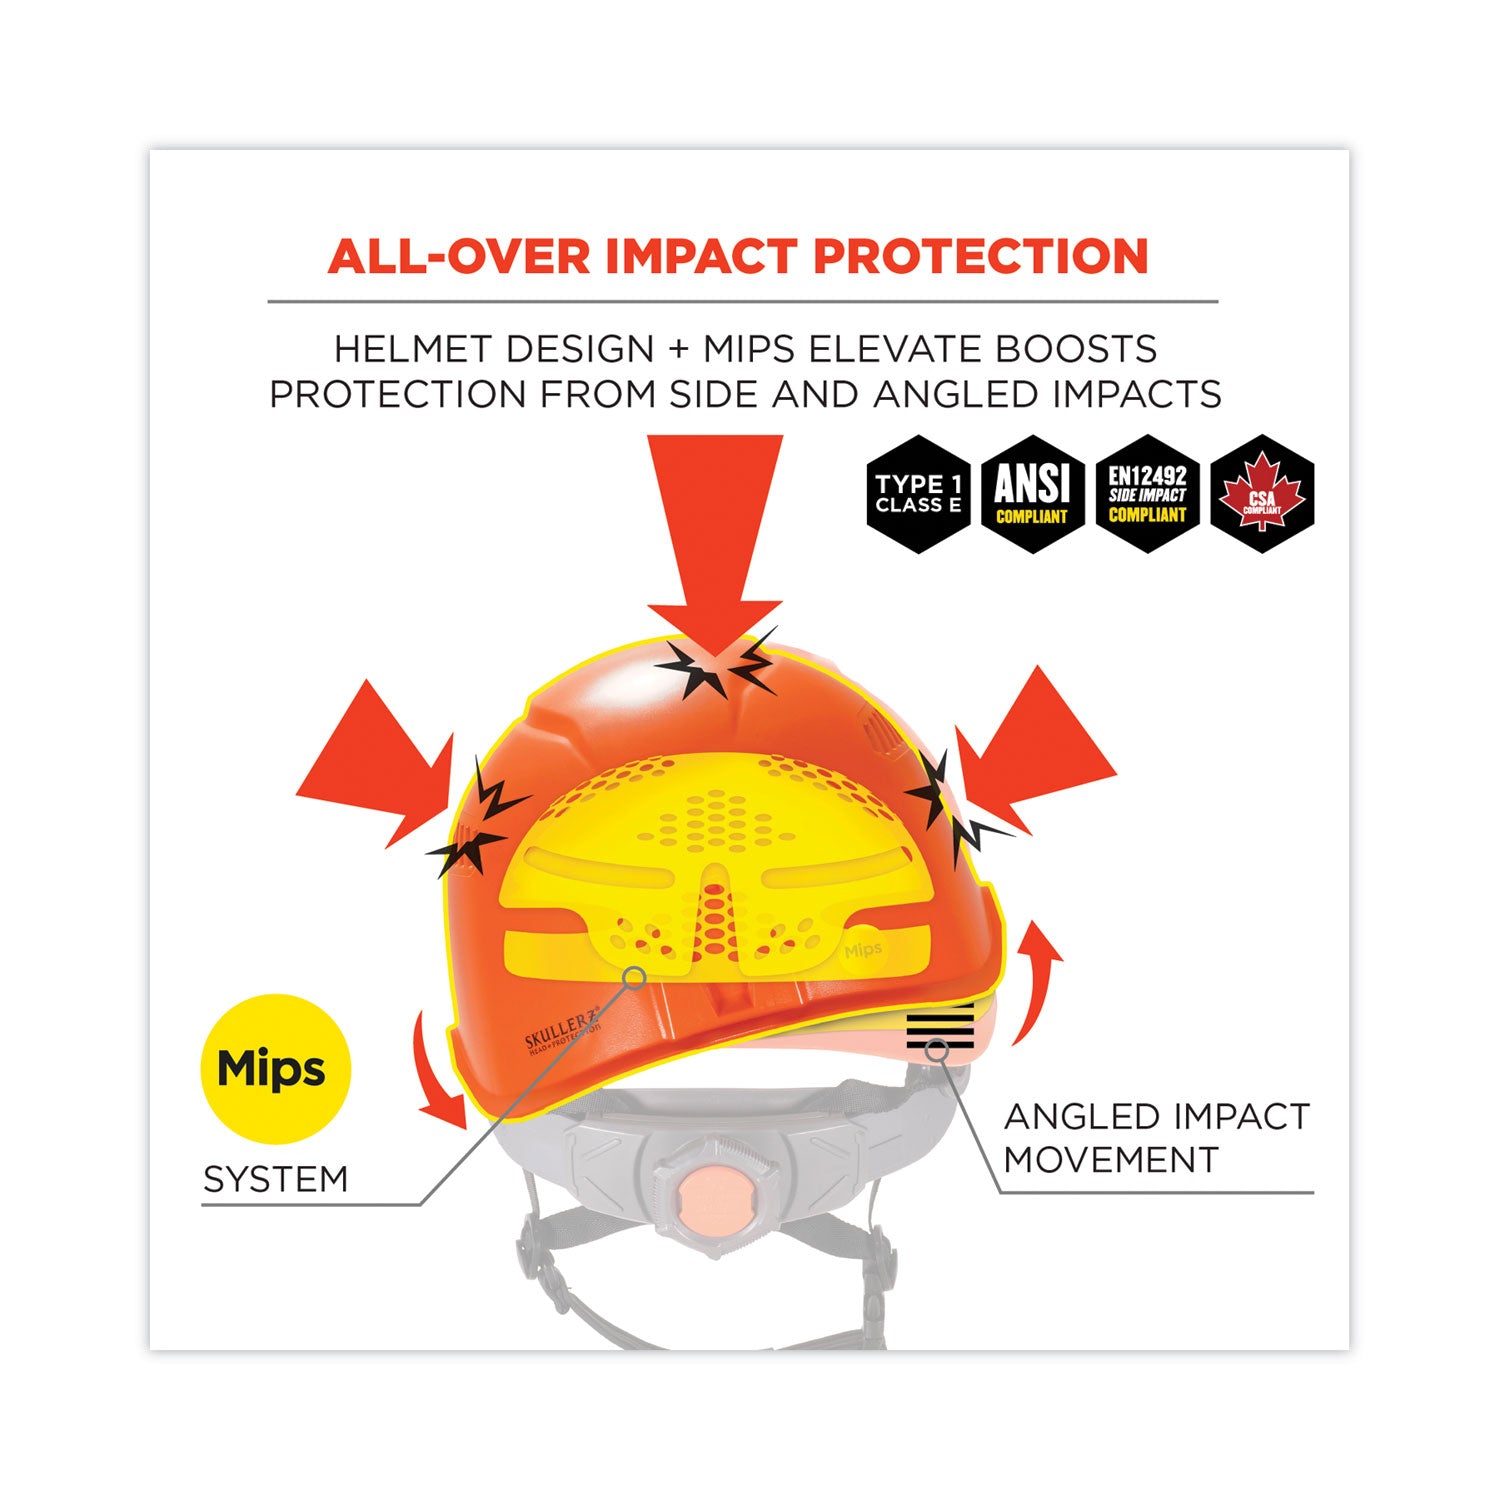 skullerz-8974-mips-class-e-safety-helmet-with-mips-elevate-ratchet-suspension-orange-ships-in-1-3-business-days_ego60255 - 5